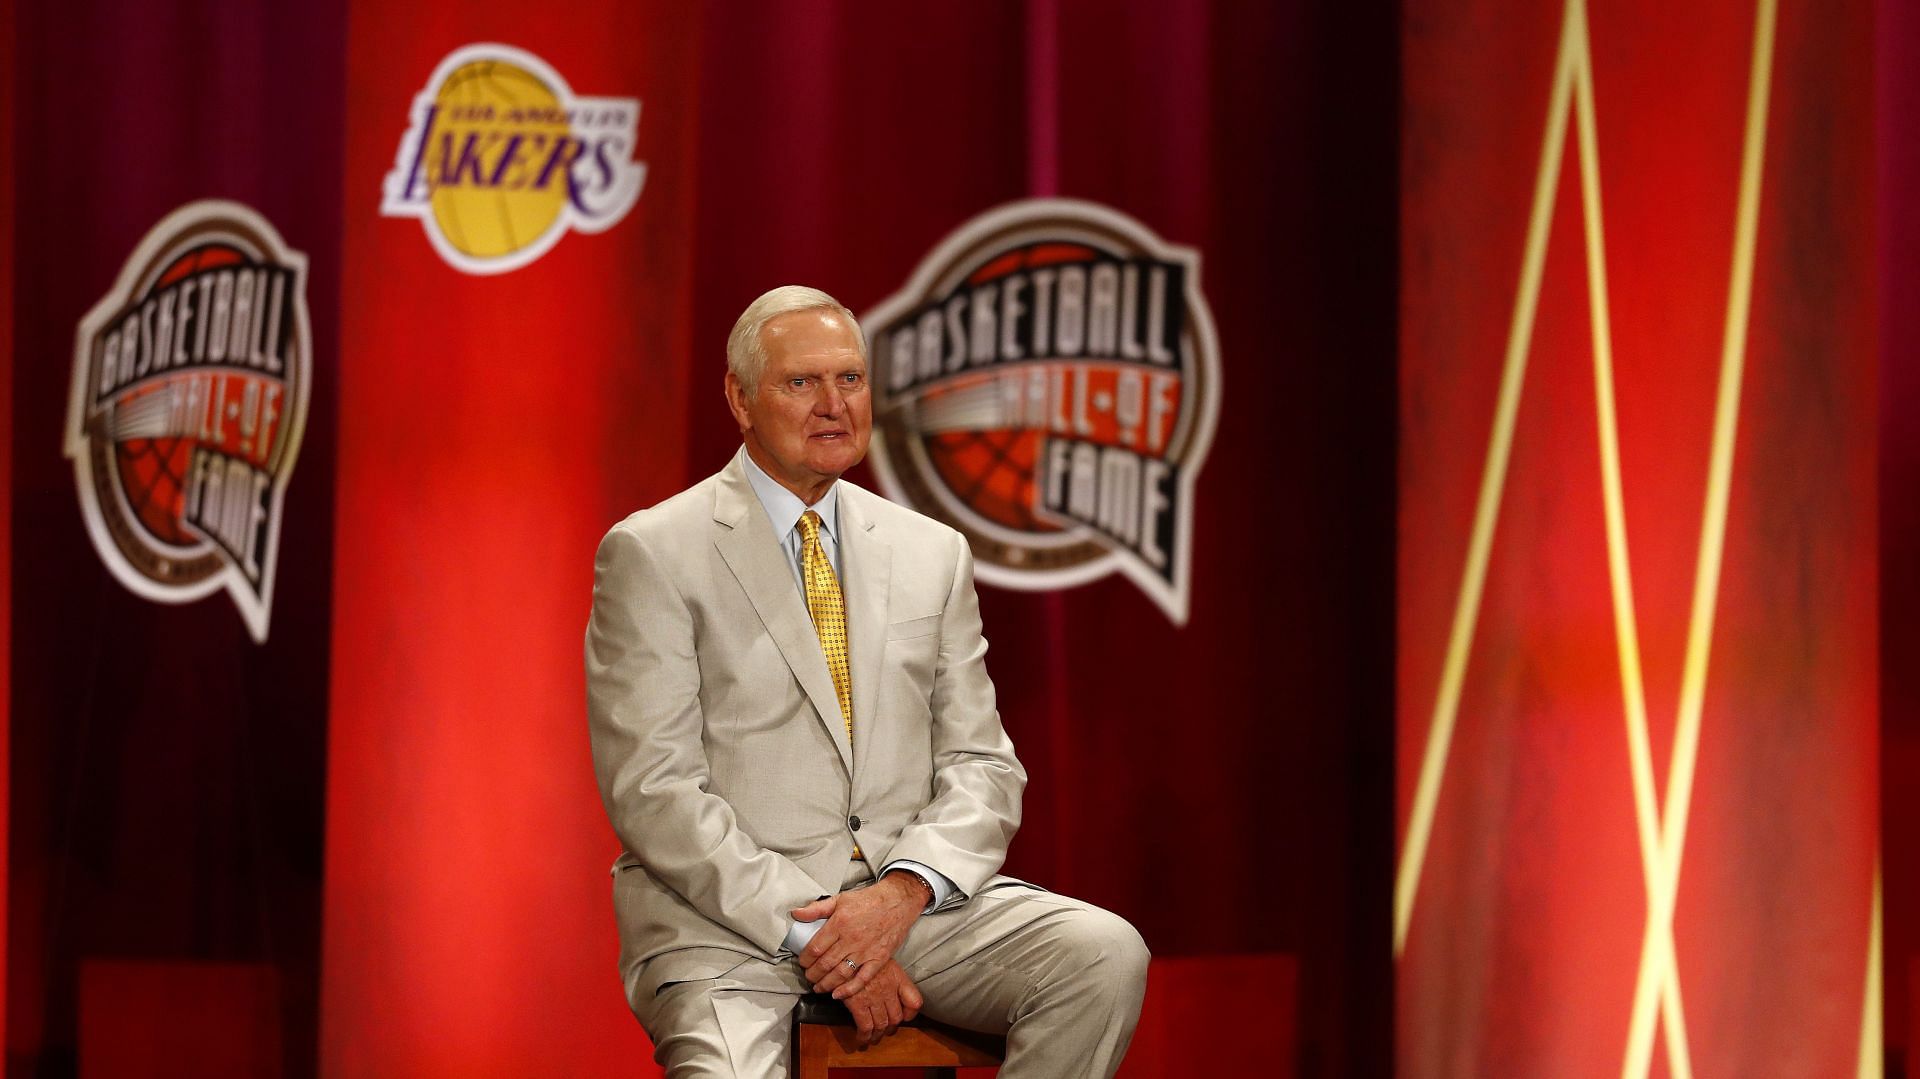 Watch: LA Lakers legend Jerry West scores a career-high 63 points against  Eastern Conference rivals New York Knicks on this day in 1962